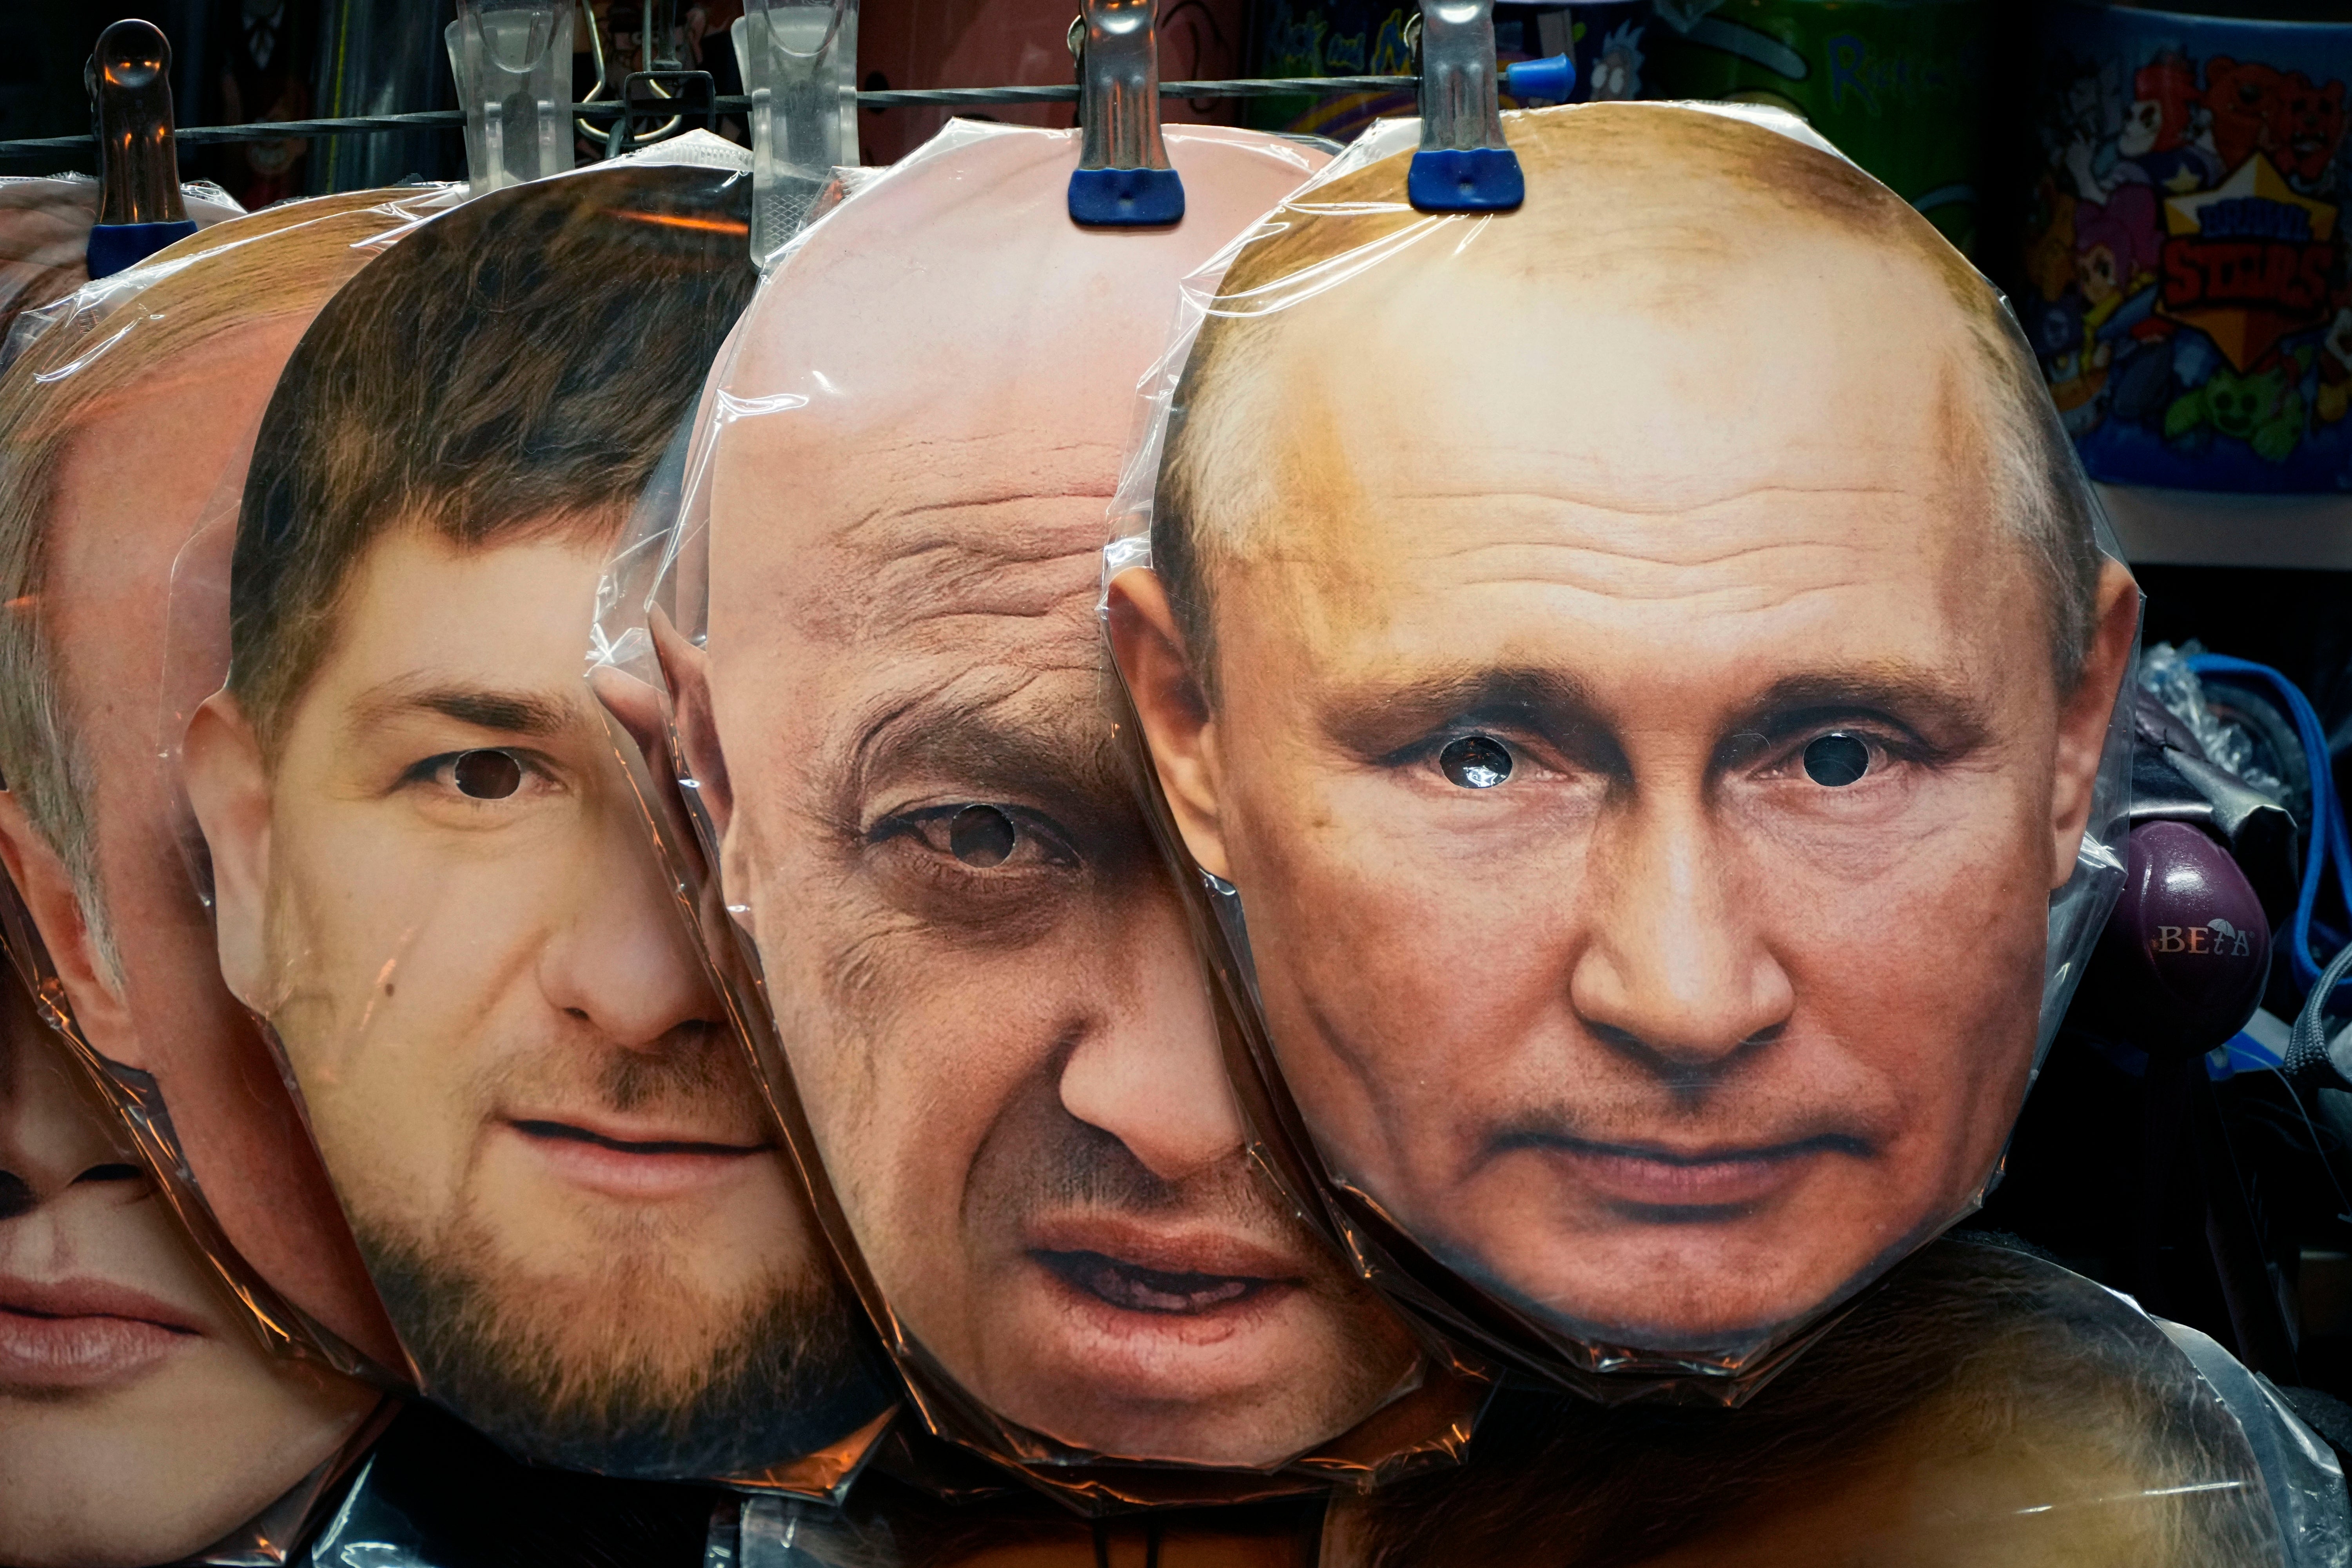 Masks showing the faces of Putin, Prigozhin and Chechnya's regional leader Ramzan Kadyrov at a souvenir shop in St Petersburg